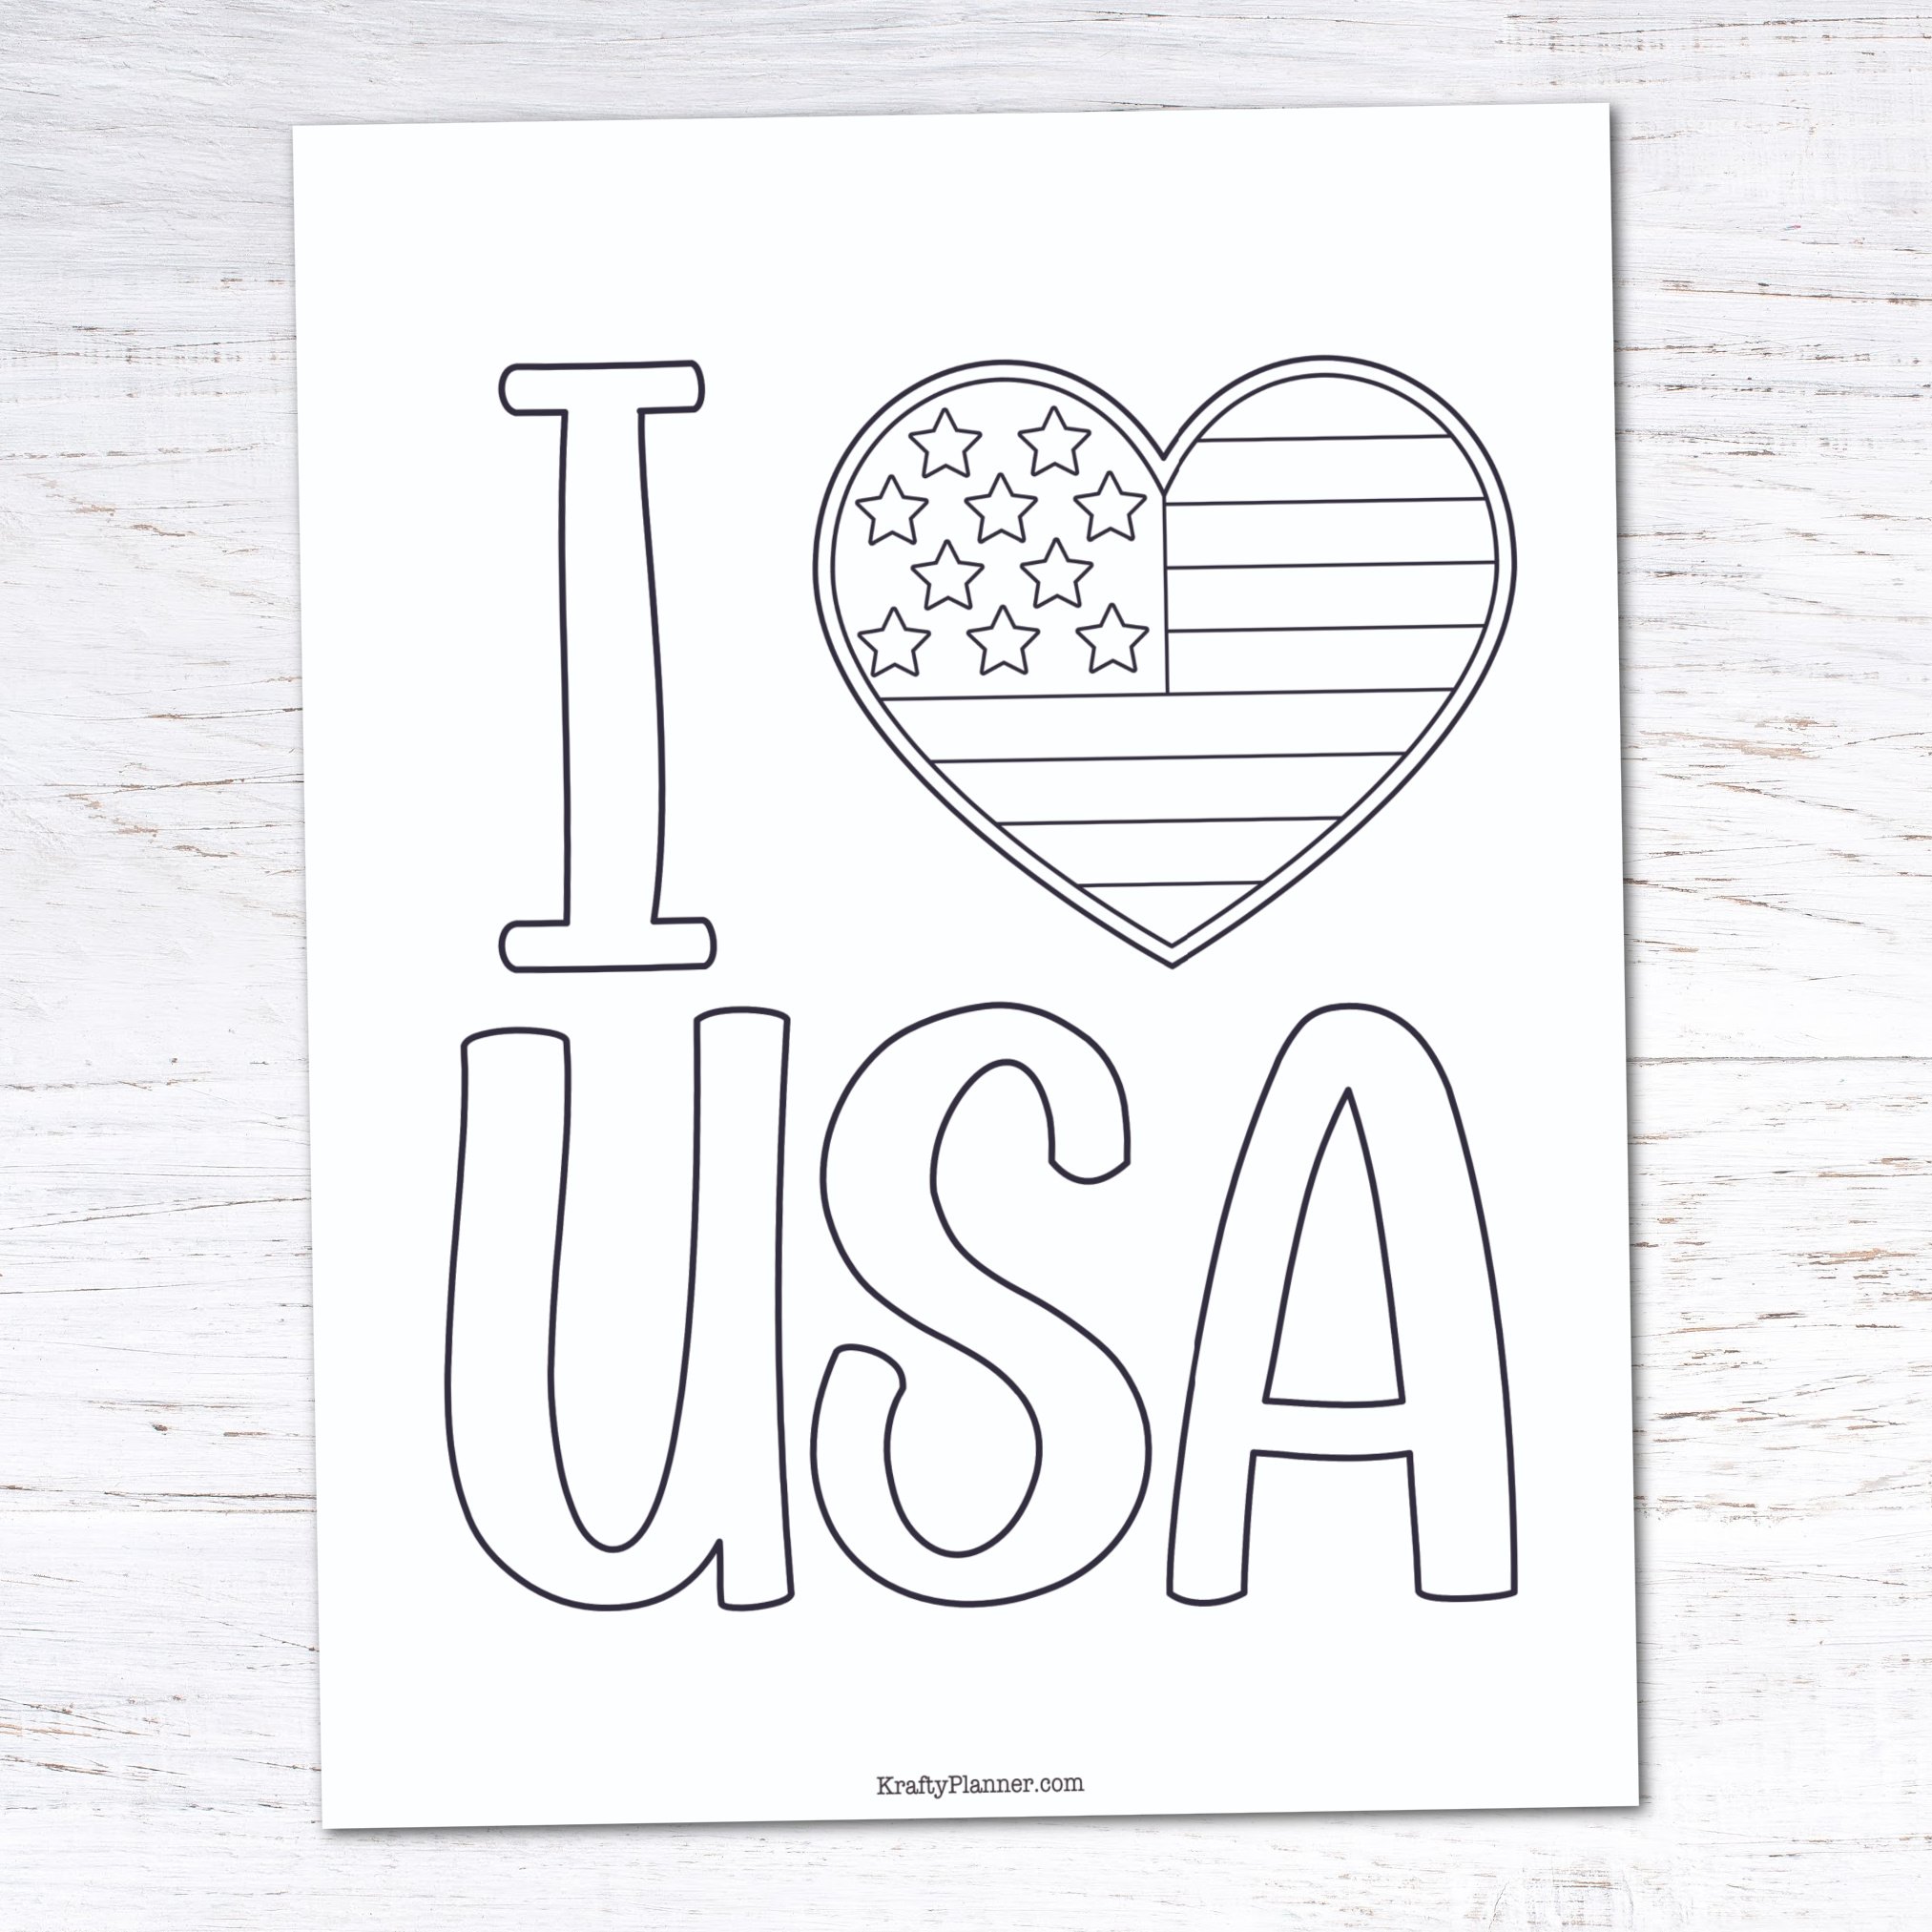 Free Printable 4th of July Coloring Pages - I Love USA.jpg